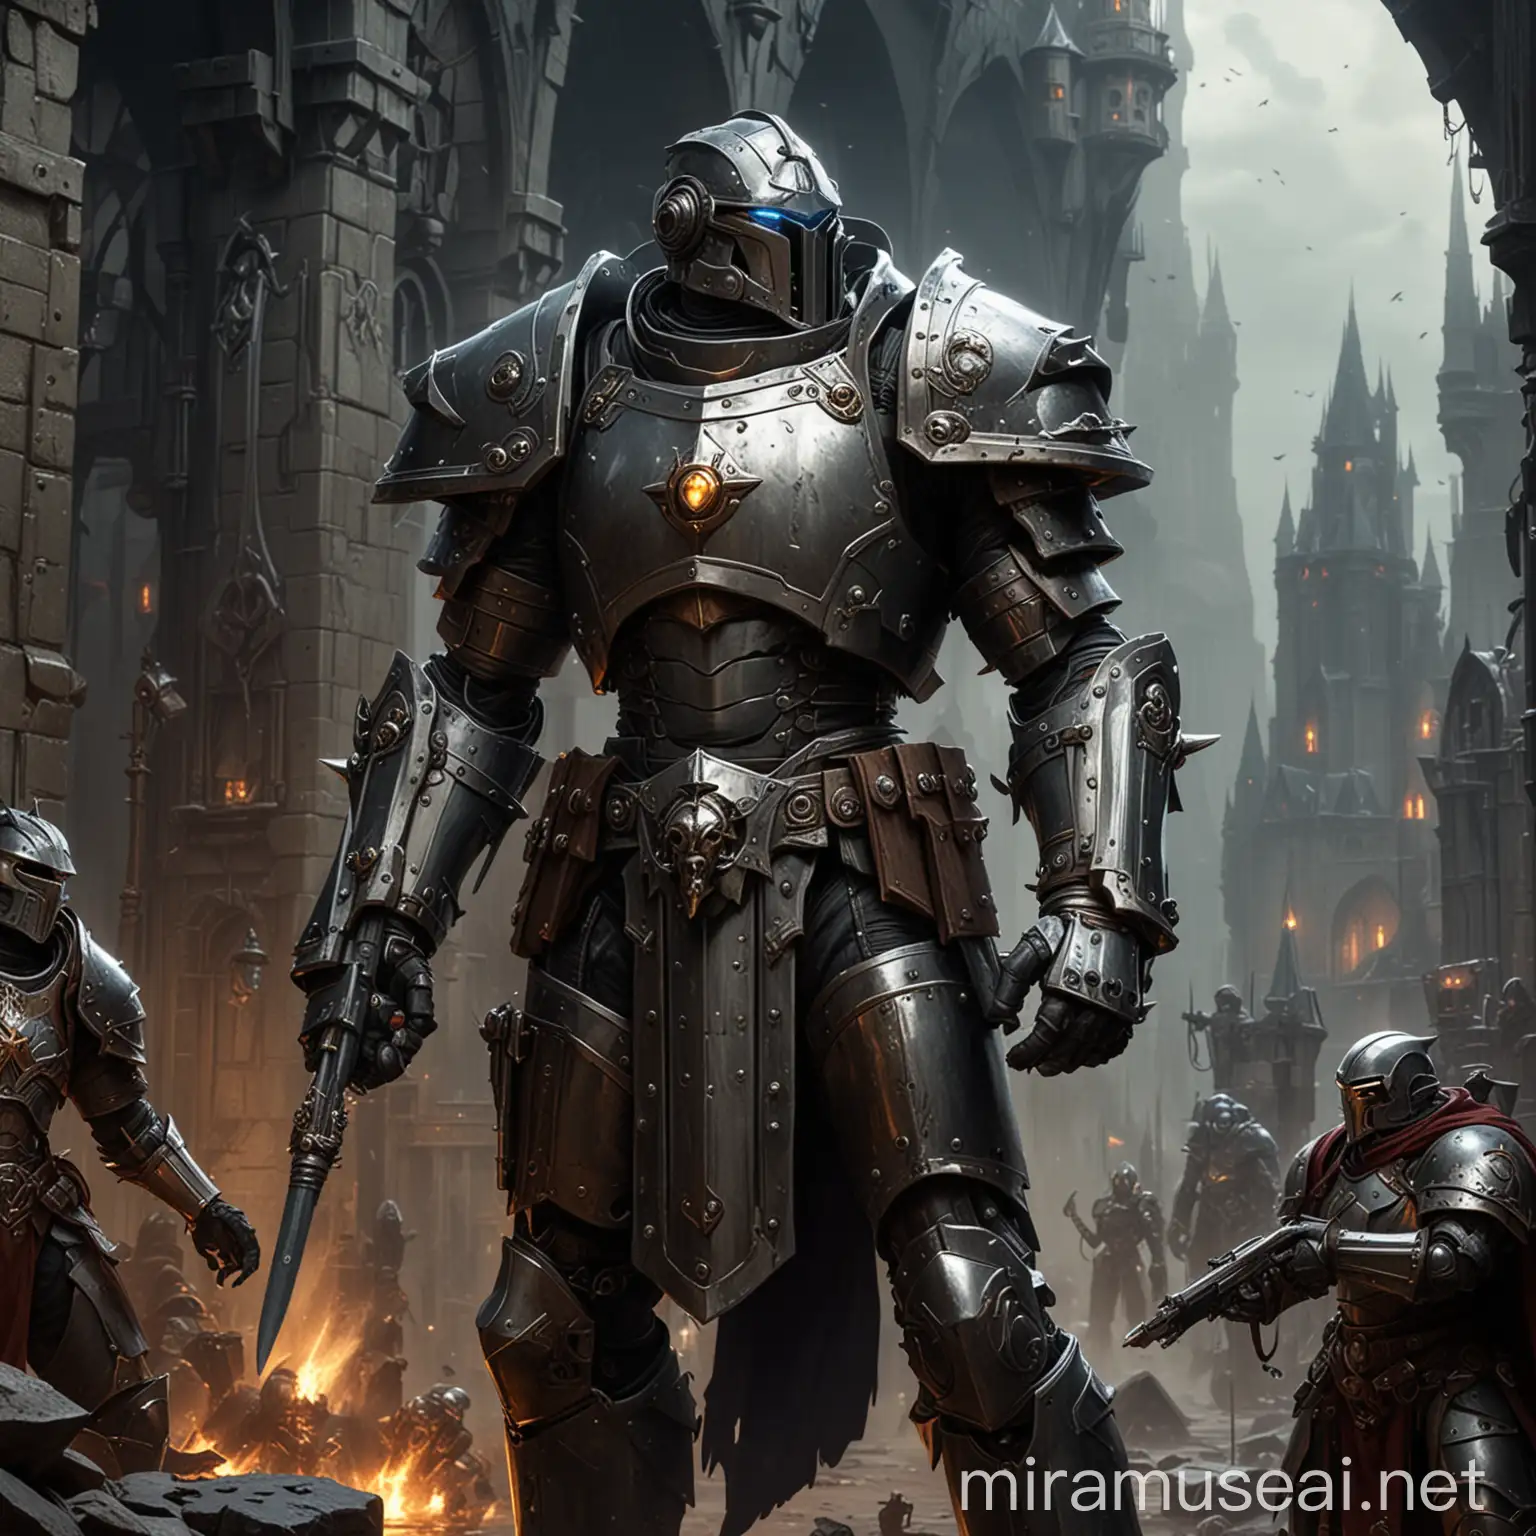 Dark Fantasy Warforged Android with Warhammer and Tower Shield